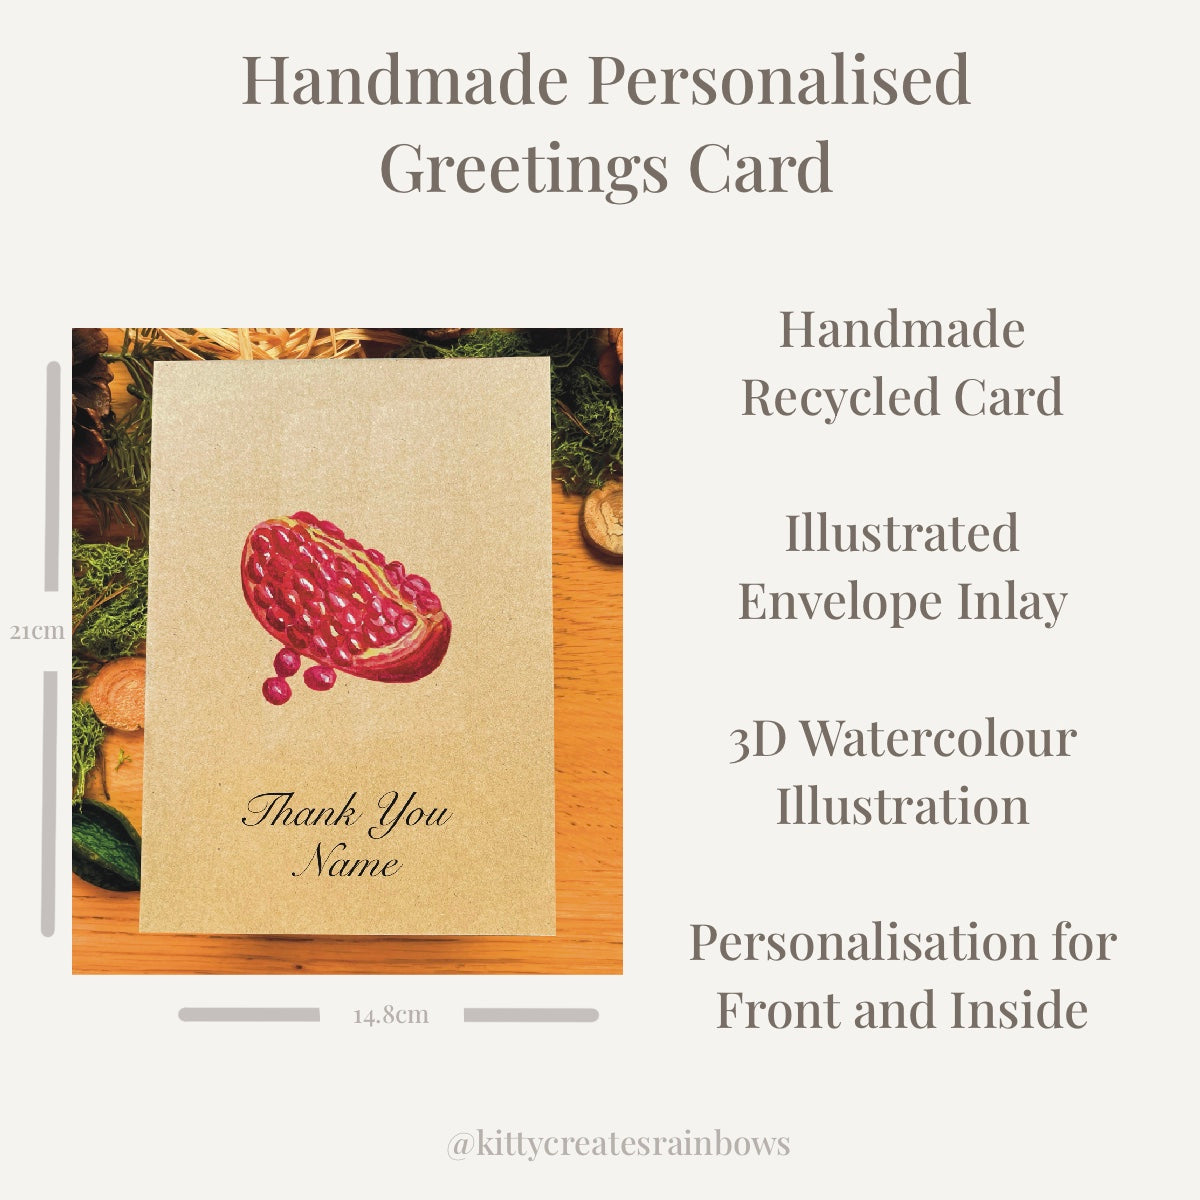 Pomegranate greetings card infographic 